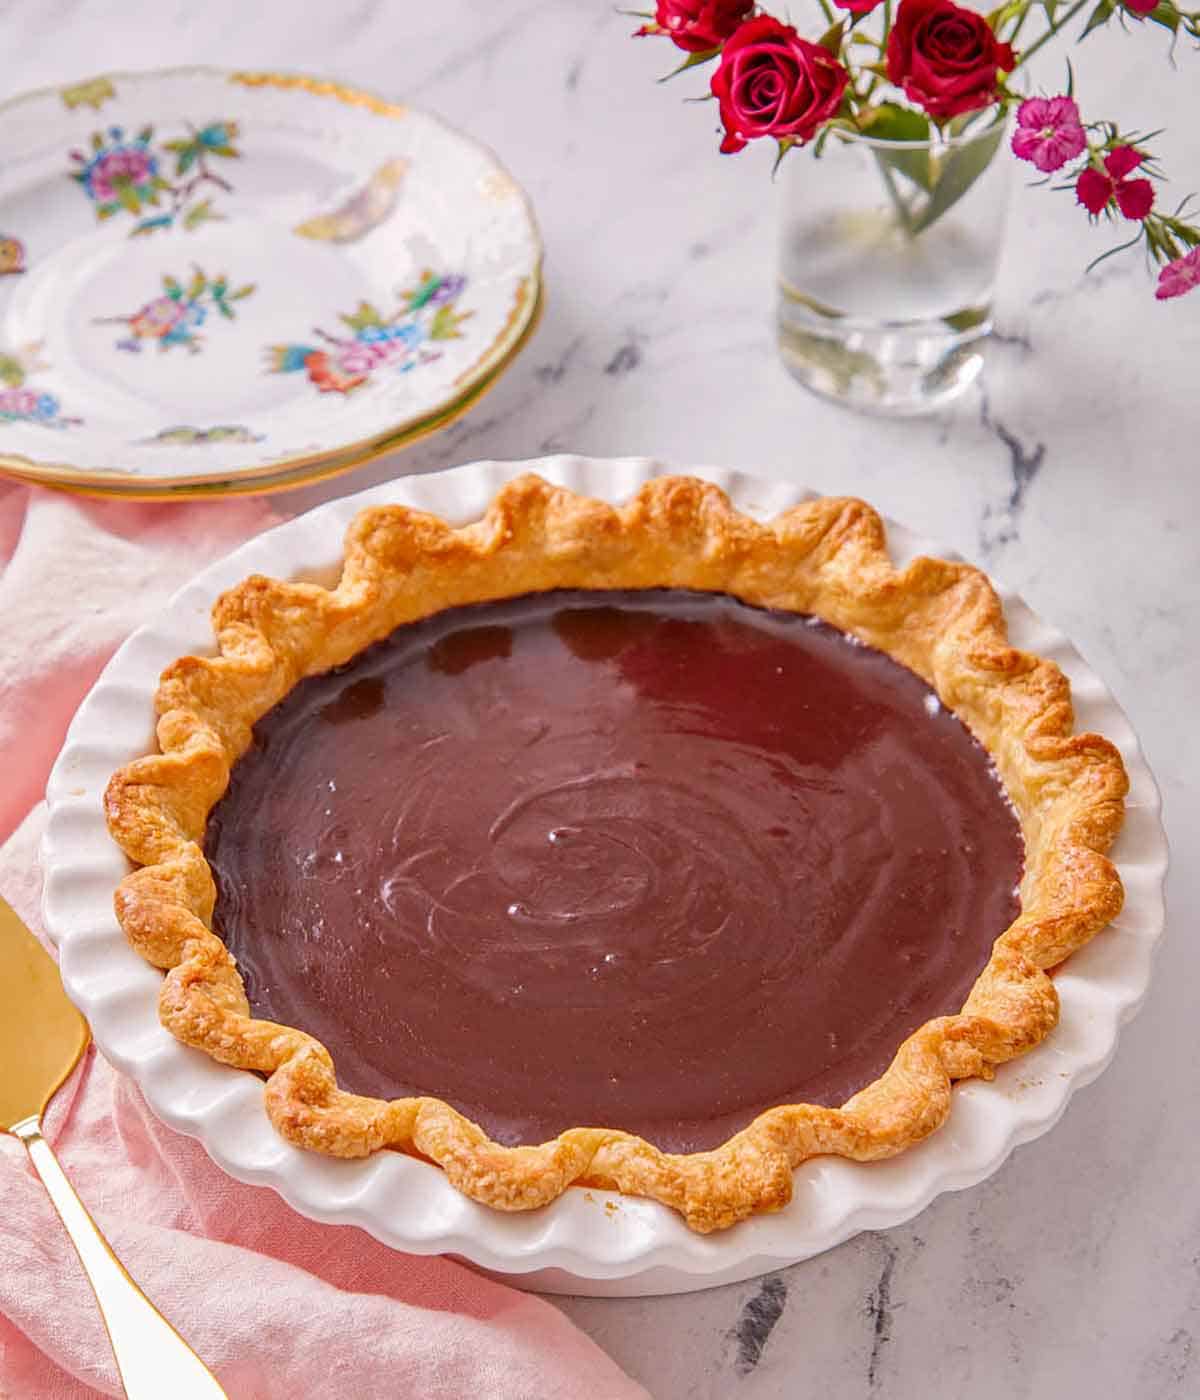 A chocolate pie in a white baking dish with flowers and a stack of plates in the background.